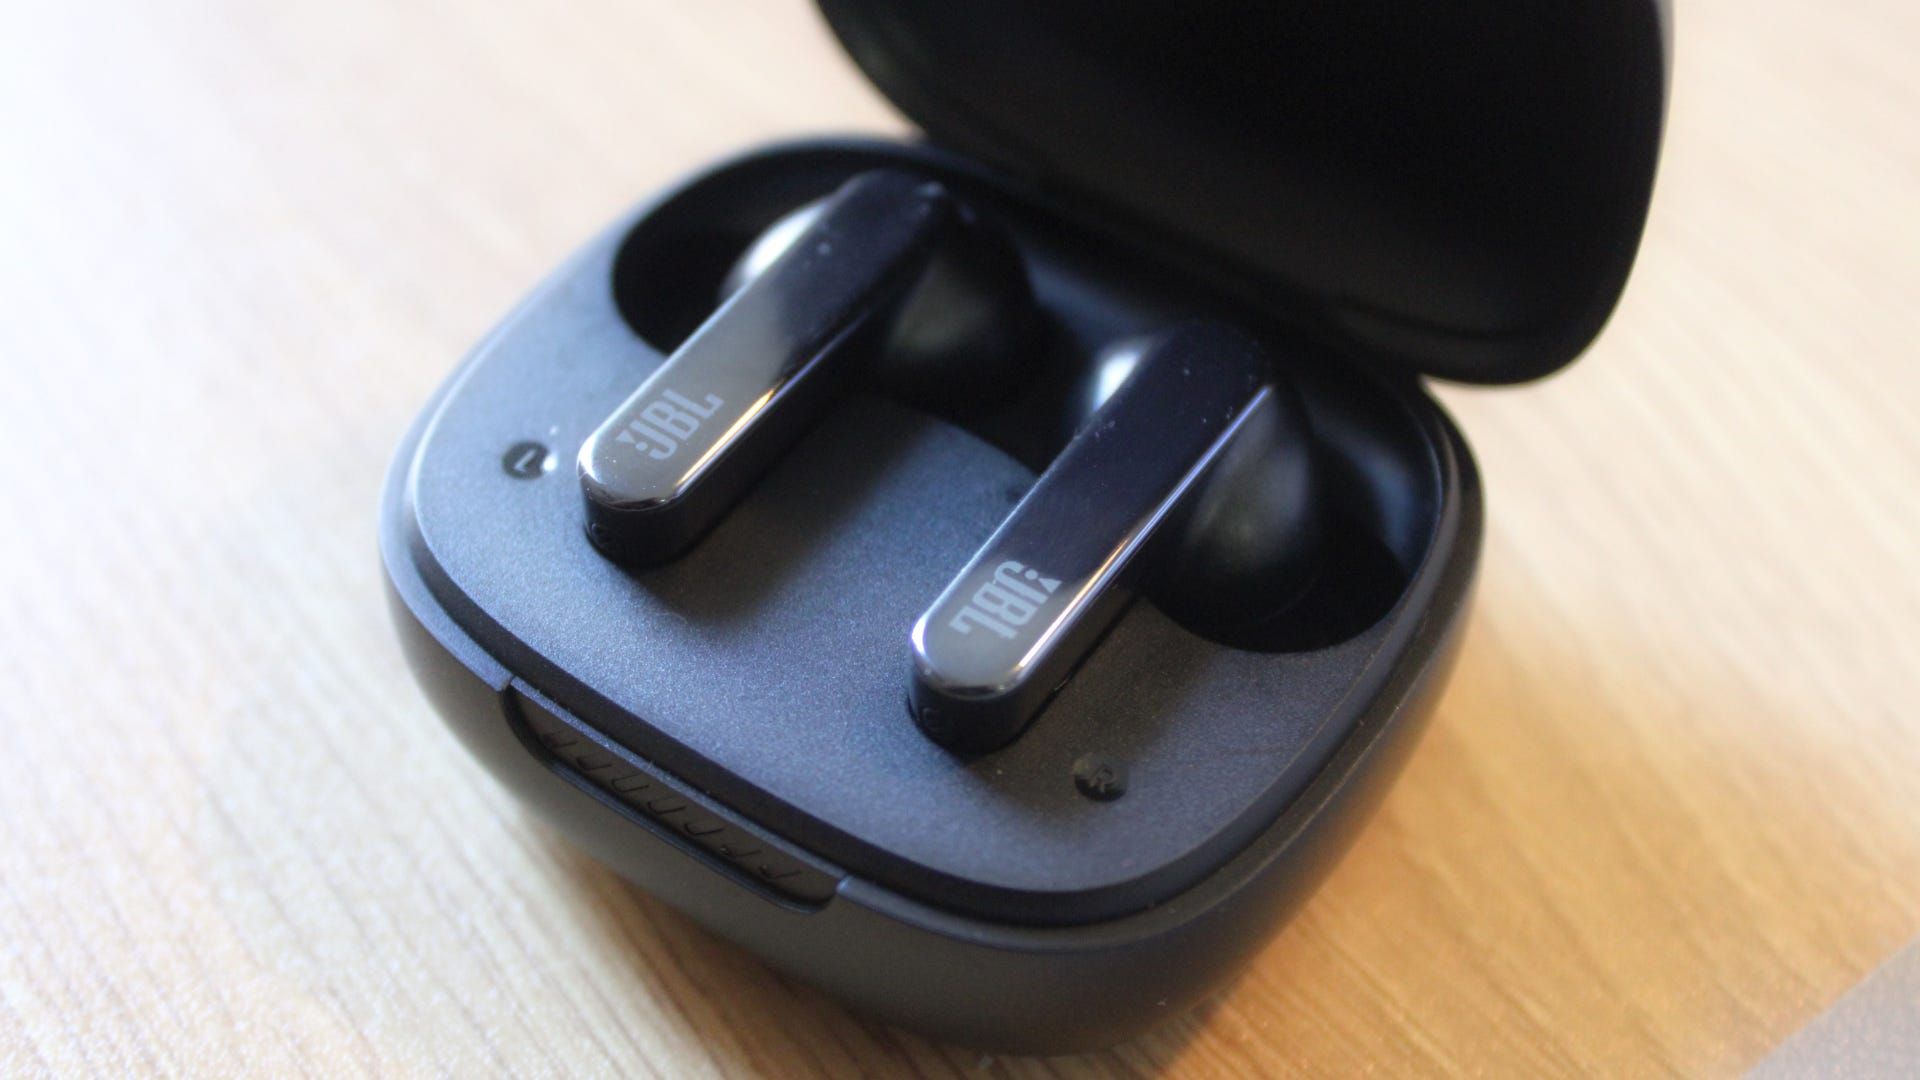 JBL LIVE PRO 2 Review A Worthy Upgrade Over The LIVE PRO+ TWS Earbuds, Gadget Explained Reviews Gadgets, Electronics